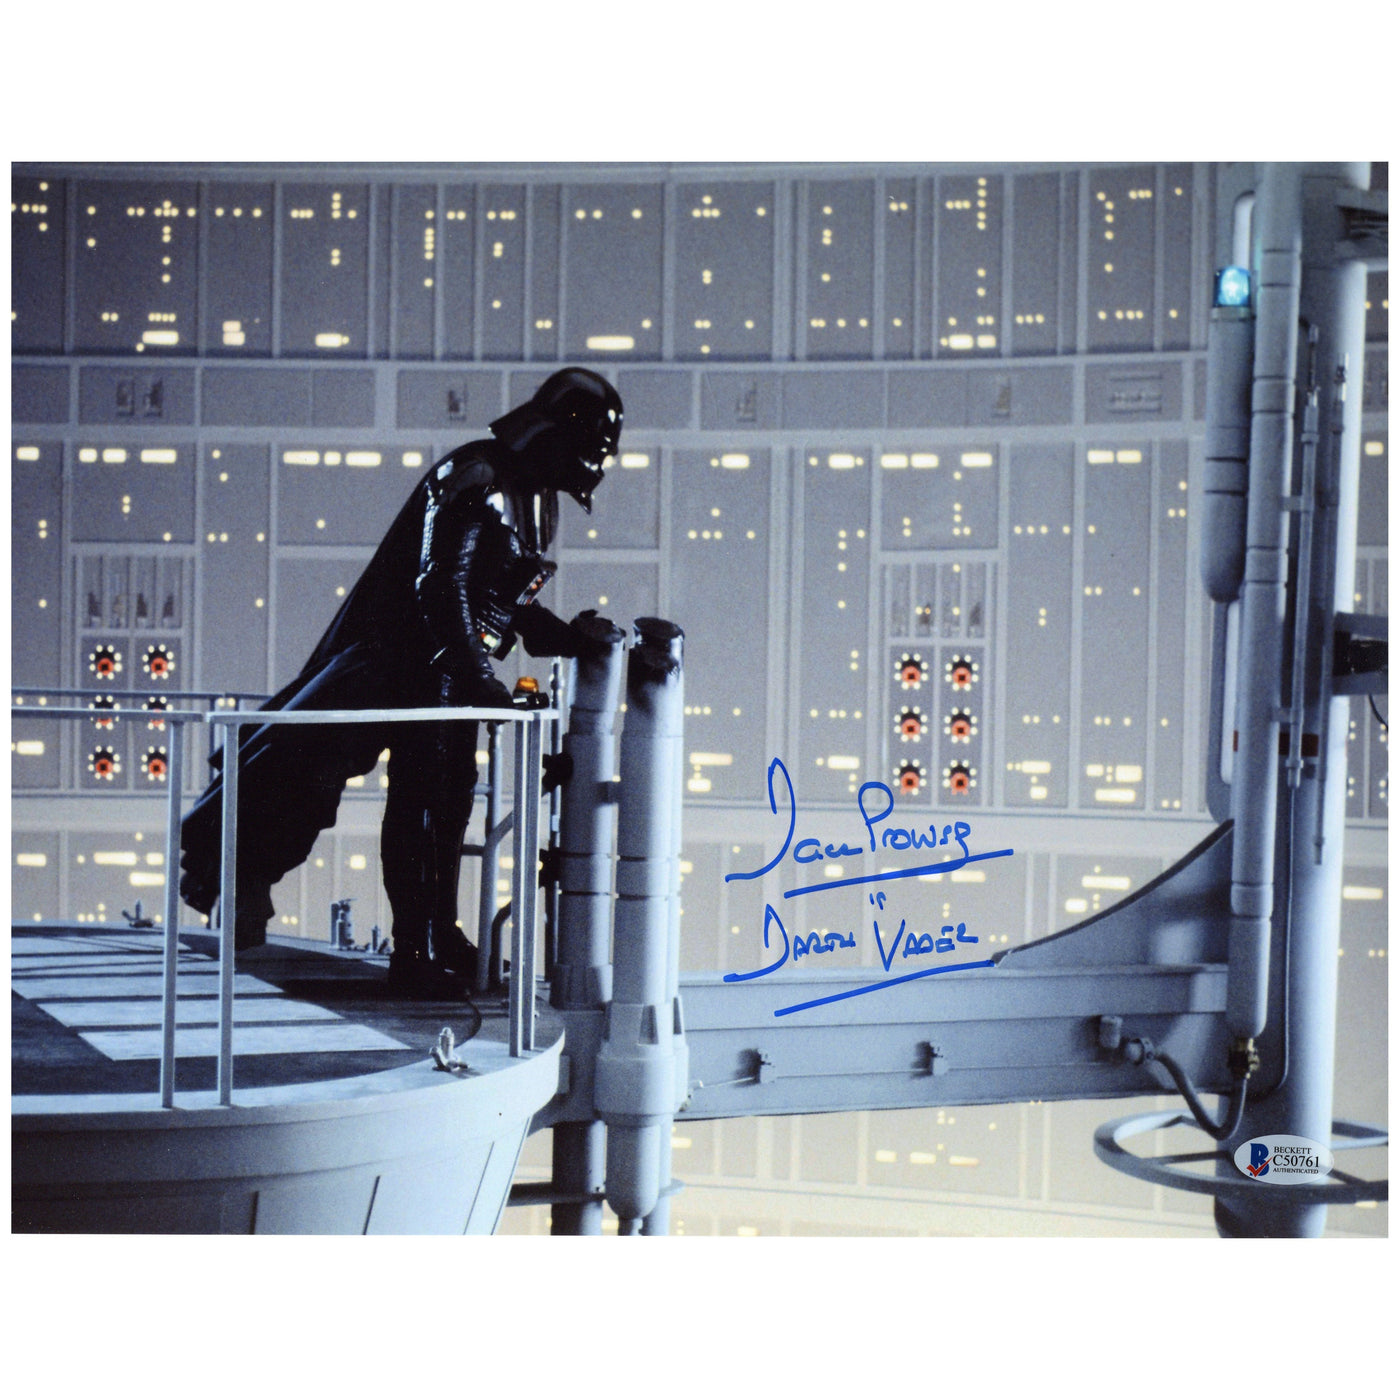 Dave Prowse Signed 11x14 Photo Star Wars Darth Vader Autographed Beckett COA 5